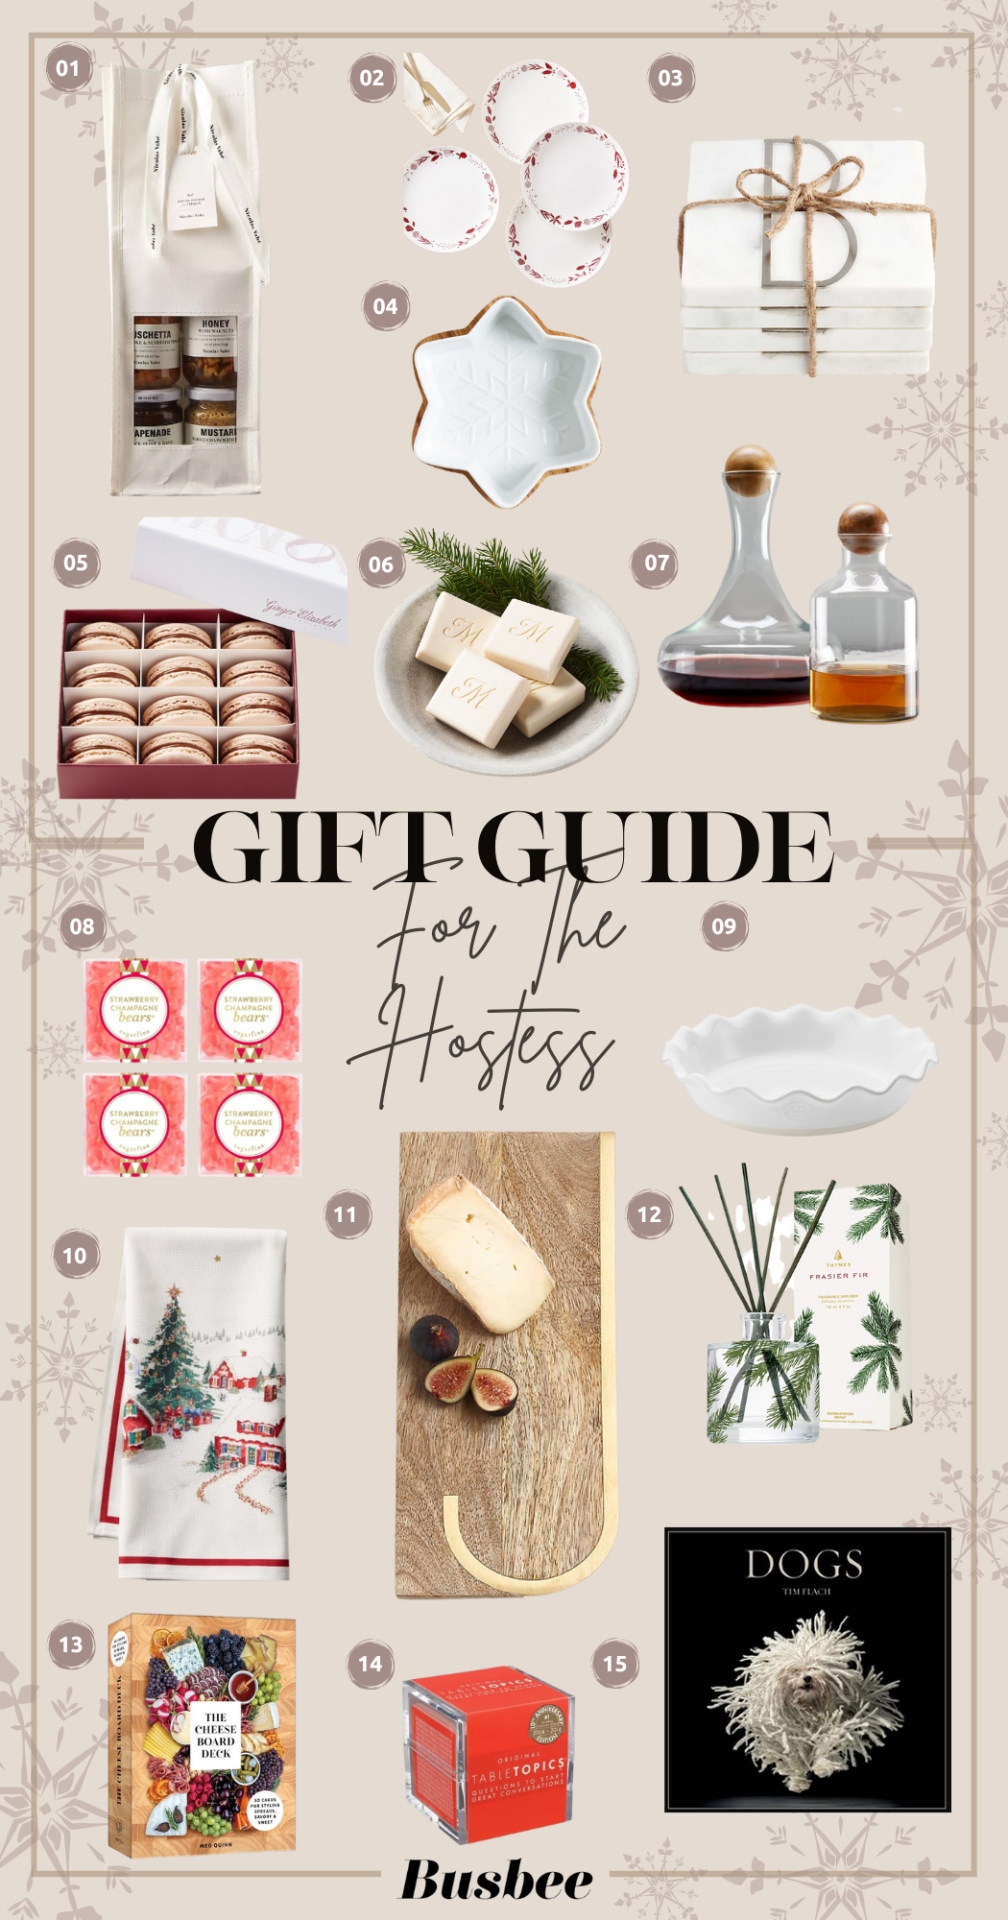 hostess gifts, hostess gift guide, best hostess gifts, 2022 hostess gifts, what to gift the hostess, hostess gifts 2022, Last minute hostess gift ideas, best hostess gifts 2022, unique hostess gifts, hostess gift ideas for weekend stay, luxury hostess gifts, William Sonoma hostess gifts, small hostess gift ideas, inexpensive hostess gift ideas,erin busbee, fashion blogger over 40, telluride, co, Gifts For The Hostess